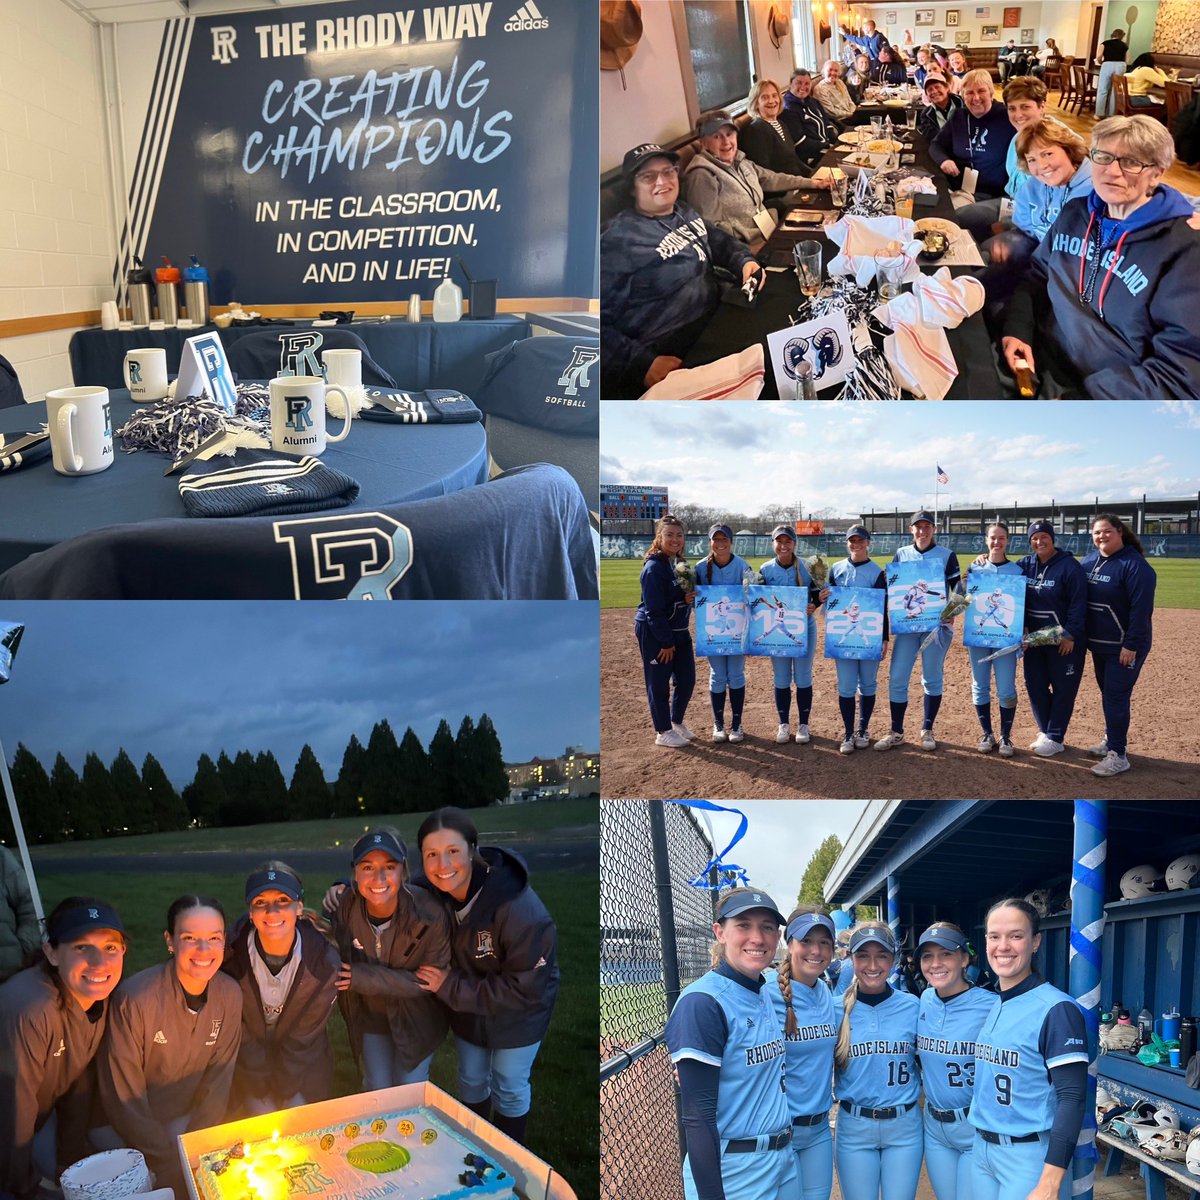 What a great week going 4️⃣➖1️⃣ and also celebrating our great Seniors and Alumni this weekend! Thank you to all that came back to celebrate 🎉🐏💙👩‍🎓